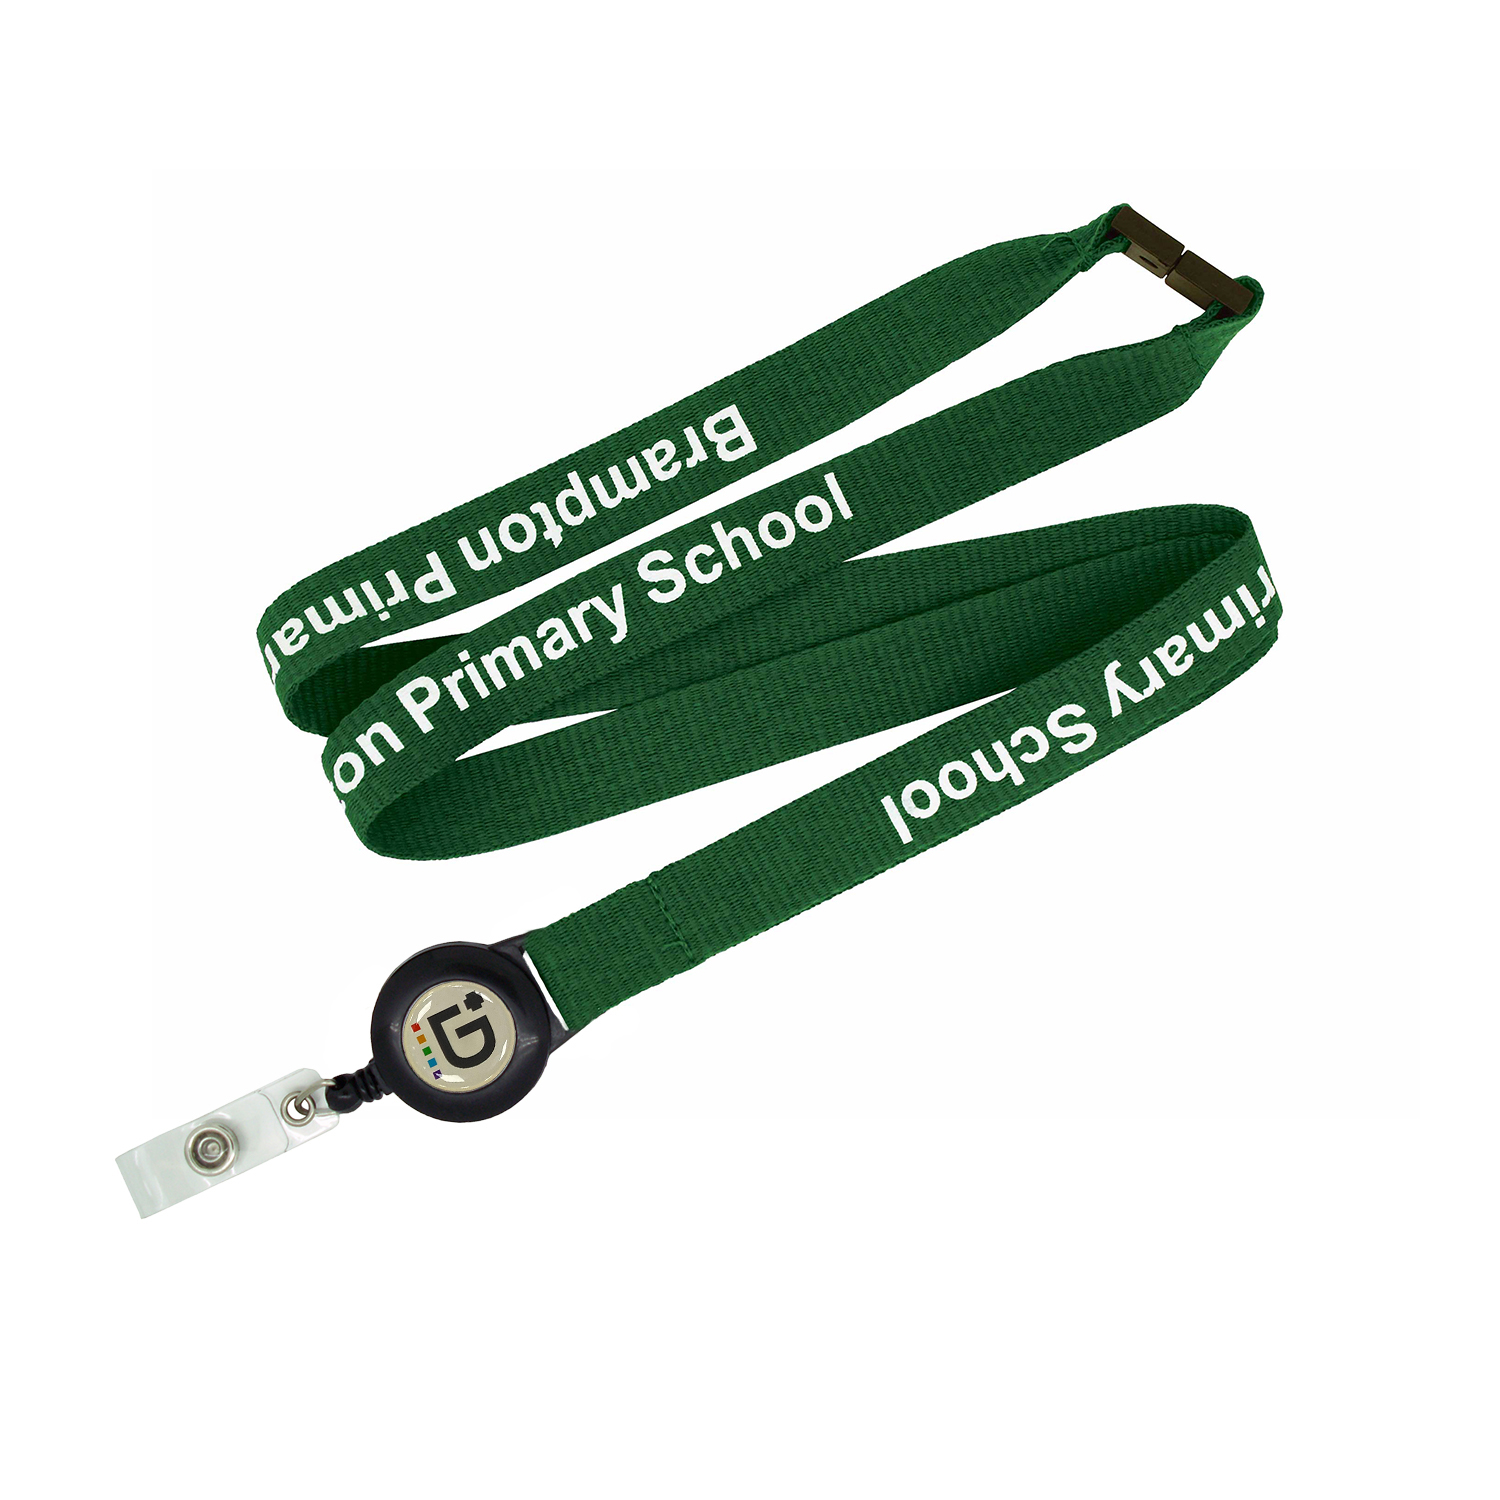 https://images-stage.pinpoint.promo/256%20-%20Flat%20Ribbed%20Lanyard%20with%20Pull%20Reel/images/Flat%20Ribbed%20Lanyards%20Green%20with%20pull%20reel.jpg